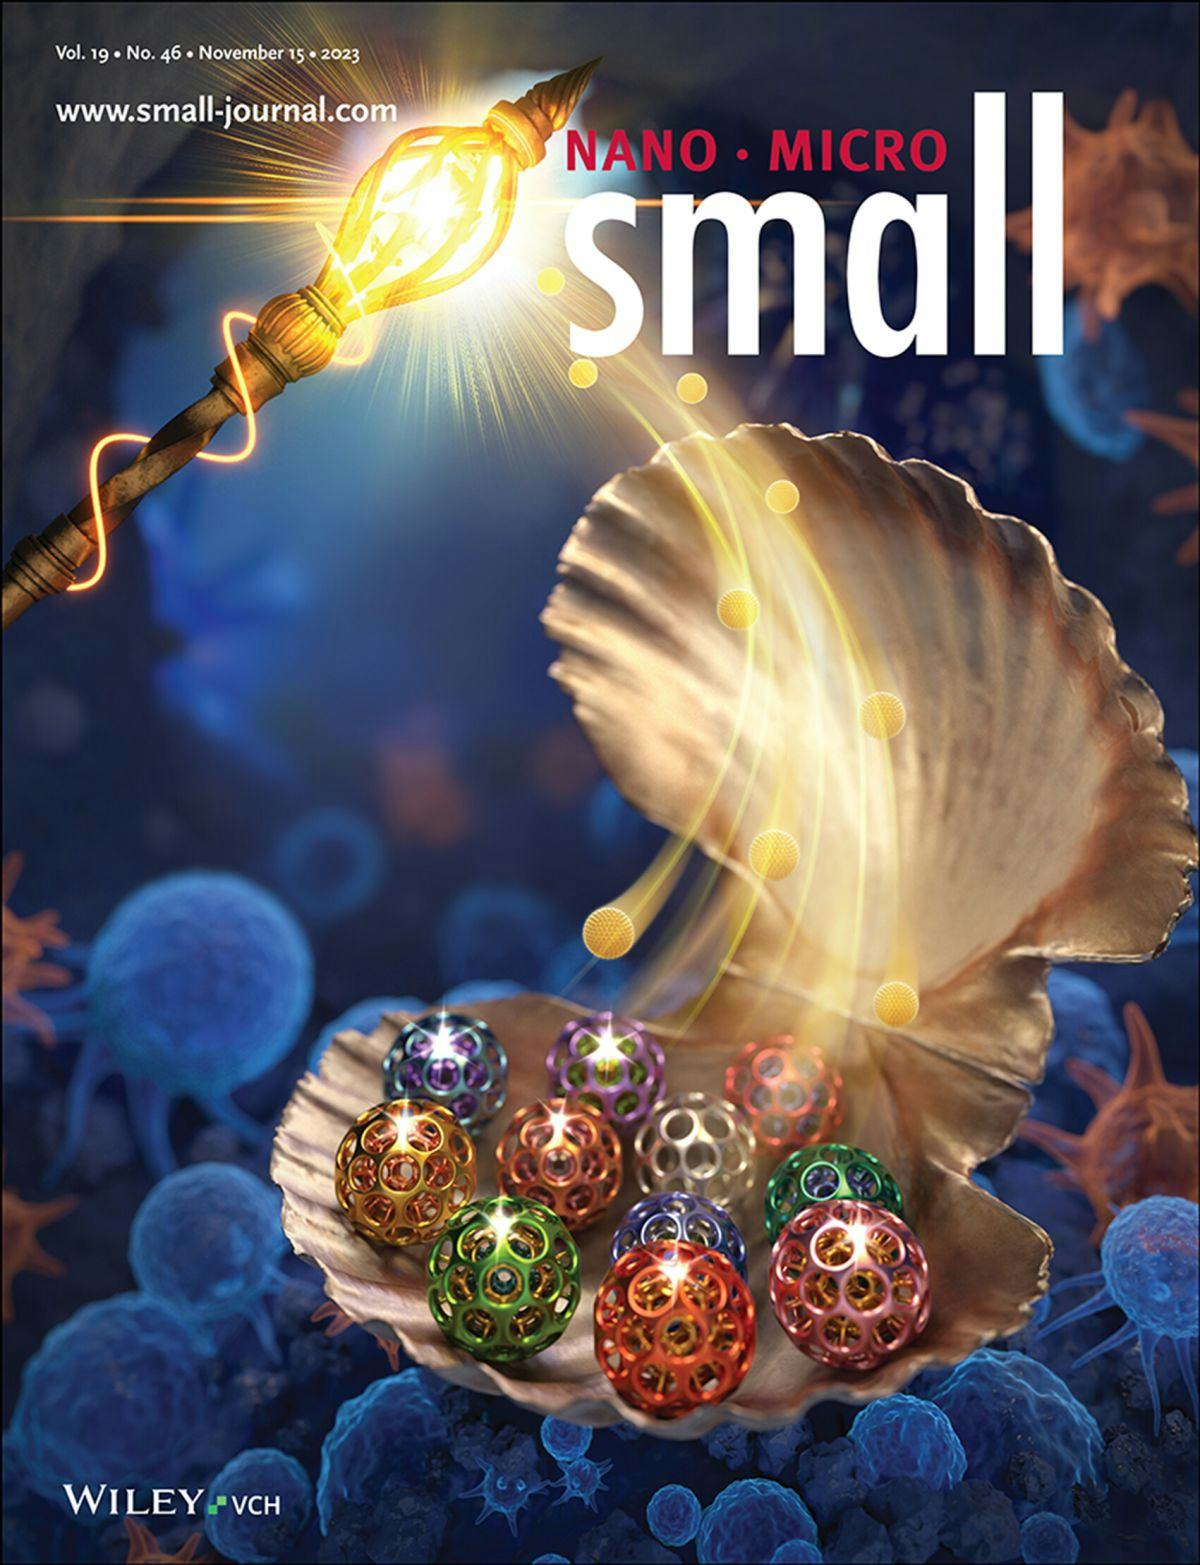 Cover of the journal small, depicting biological molecules in and behind a shimmering clam shell, and a torch in the upper lefthand corner.